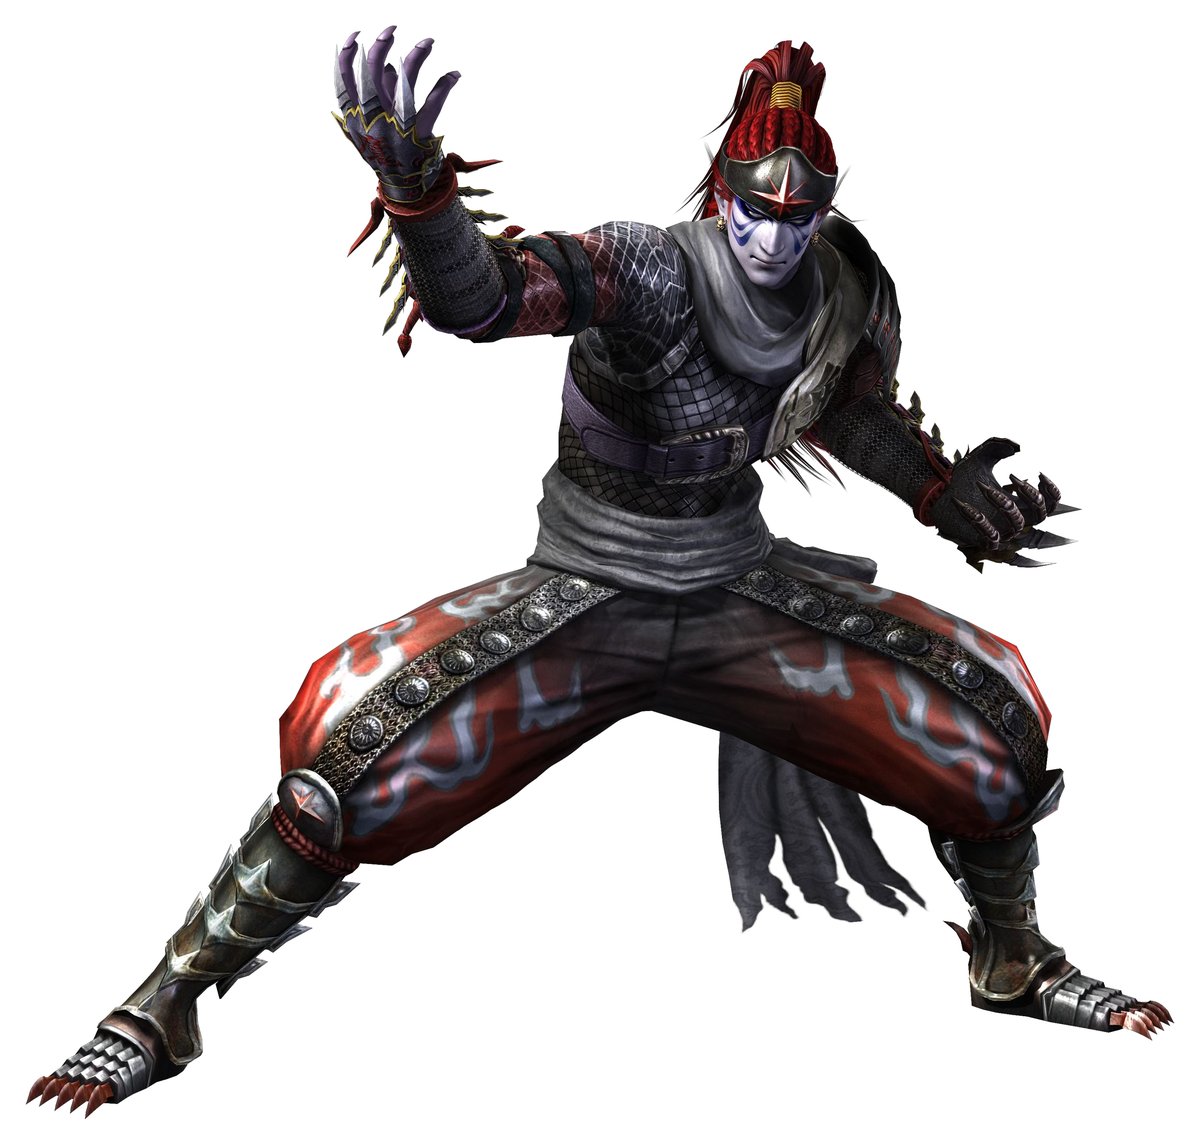 Fuma KotaroHis hair? WACK! His gear? WACK! His purple skin? WACK! His massive height? WACK! The way that he talks? WACK! The way that his arms stretch out like he's Mr. Fantastic? WACK! But playing as him? That's tight as FUCK